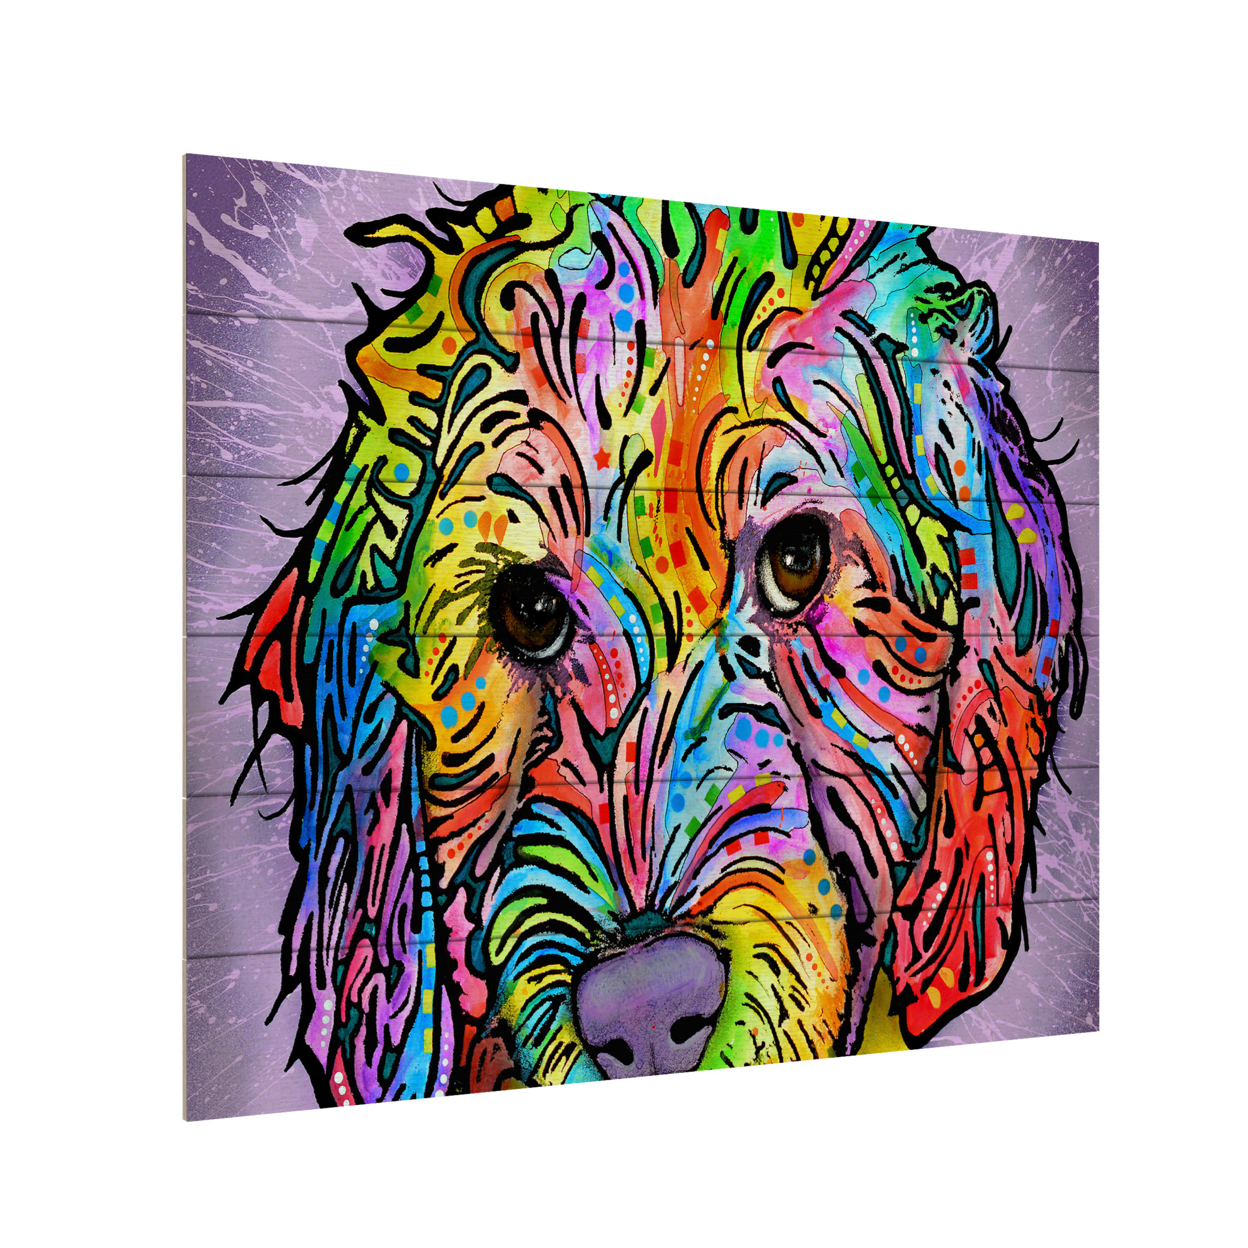 Wooden Slat Art 18 X 22 Inches Titled Sweet Poodle Ready To Hang Home Decor Picture